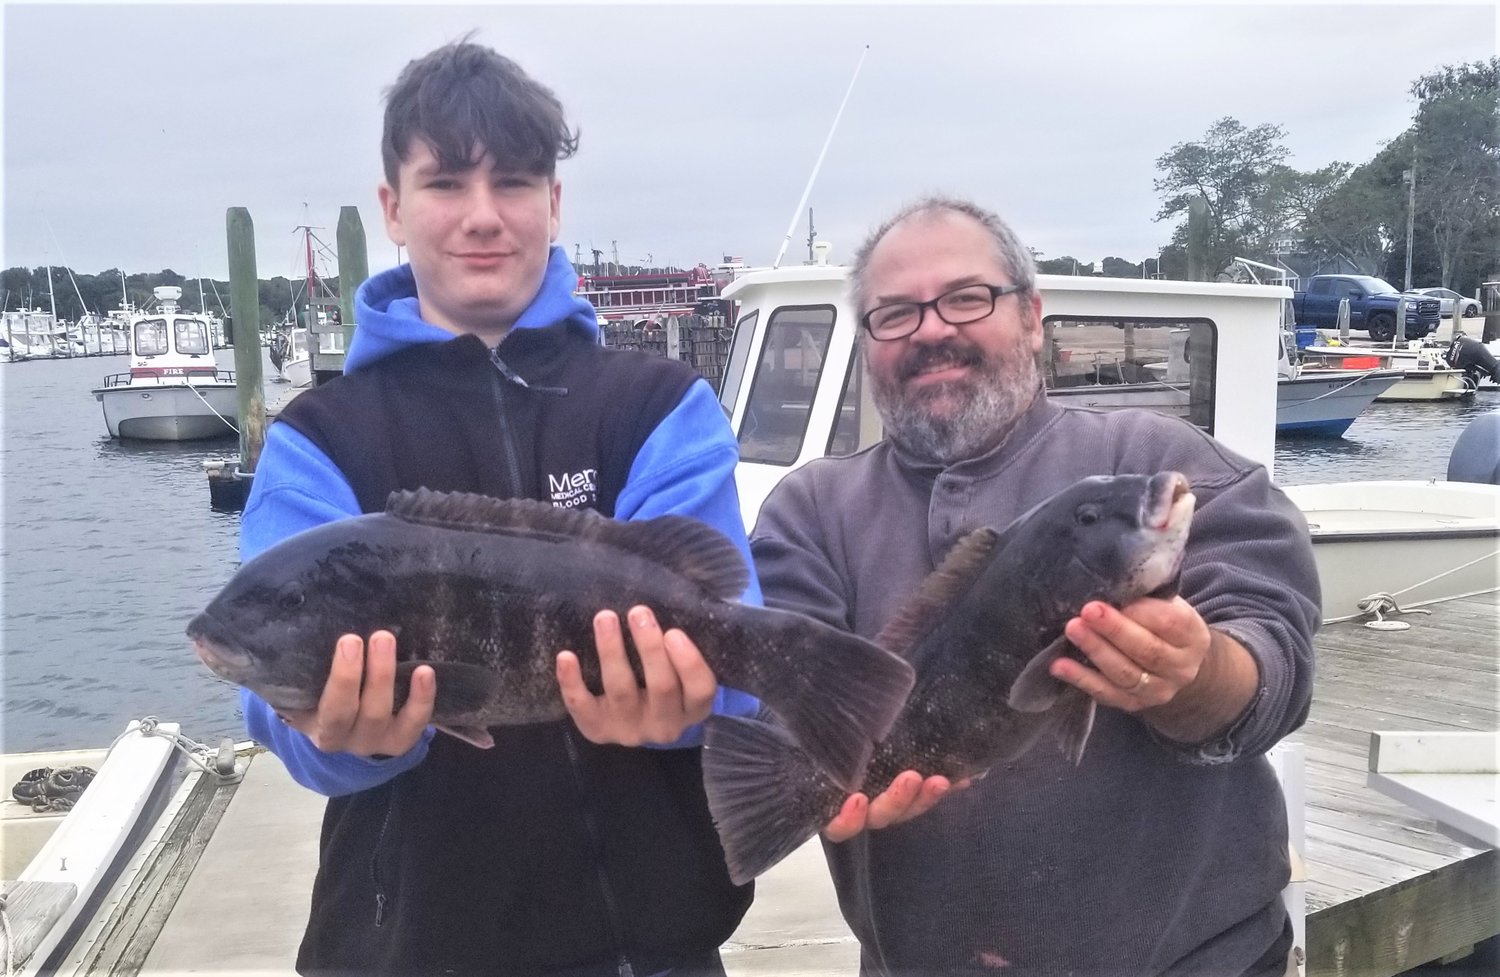 Tautog bite very good: Andrew Stevens with his father Jim Stevens of Warwick with the tautog they caught Saturday at General Rock in North Kingstown. It was the first time Andrew had been tautog fishing.